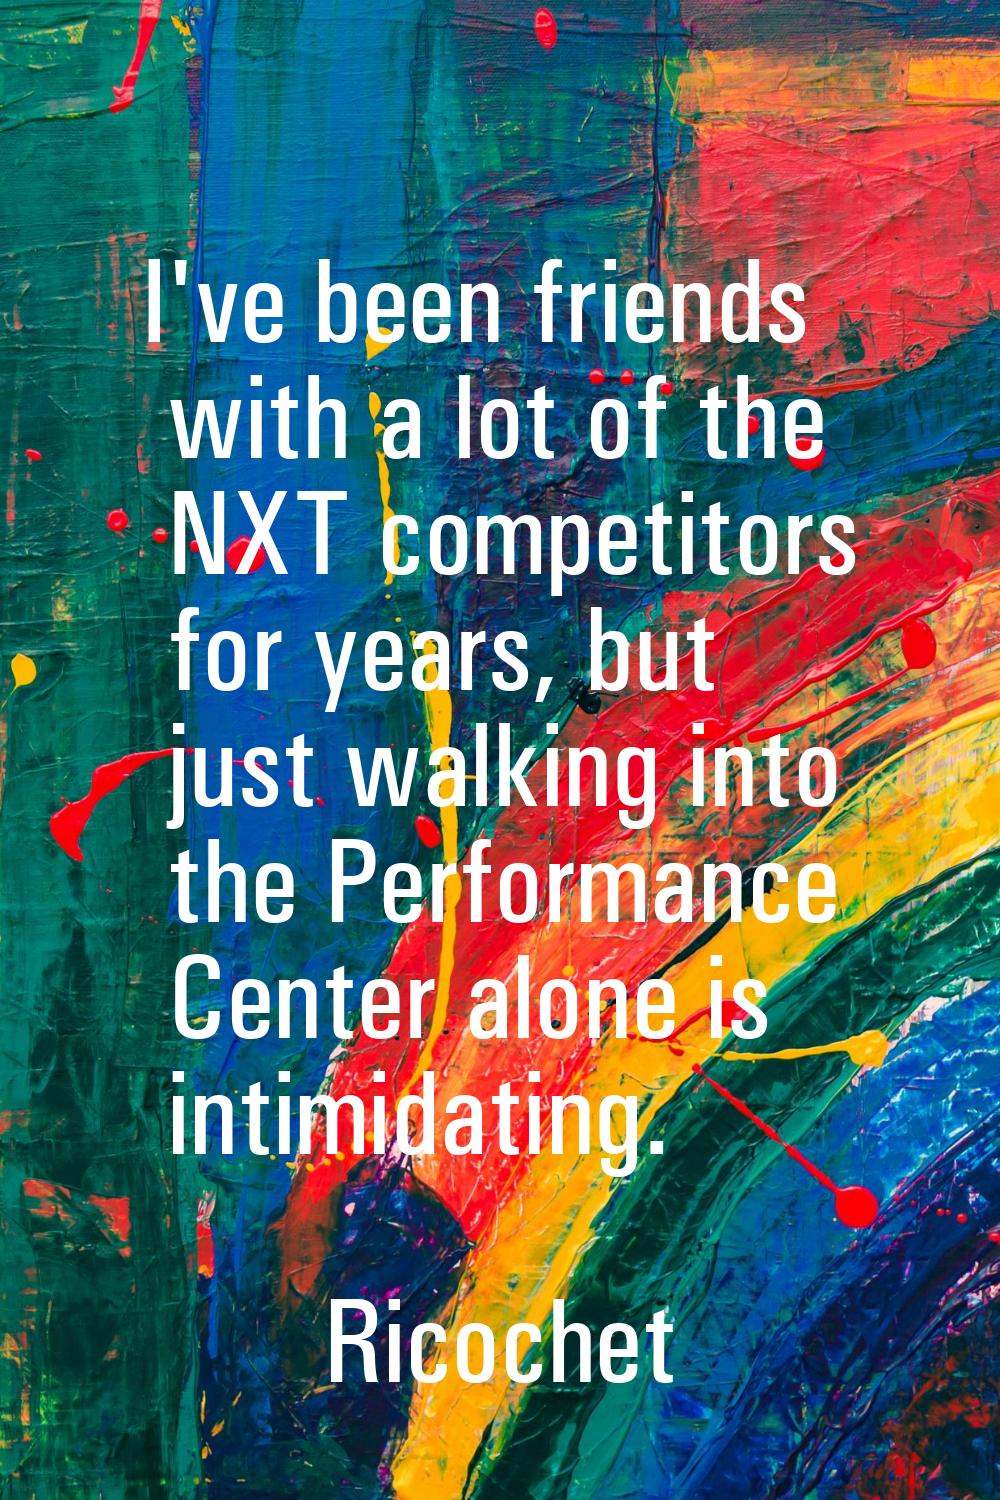 I've been friends with a lot of the NXT competitors for years, but just walking into the Performanc